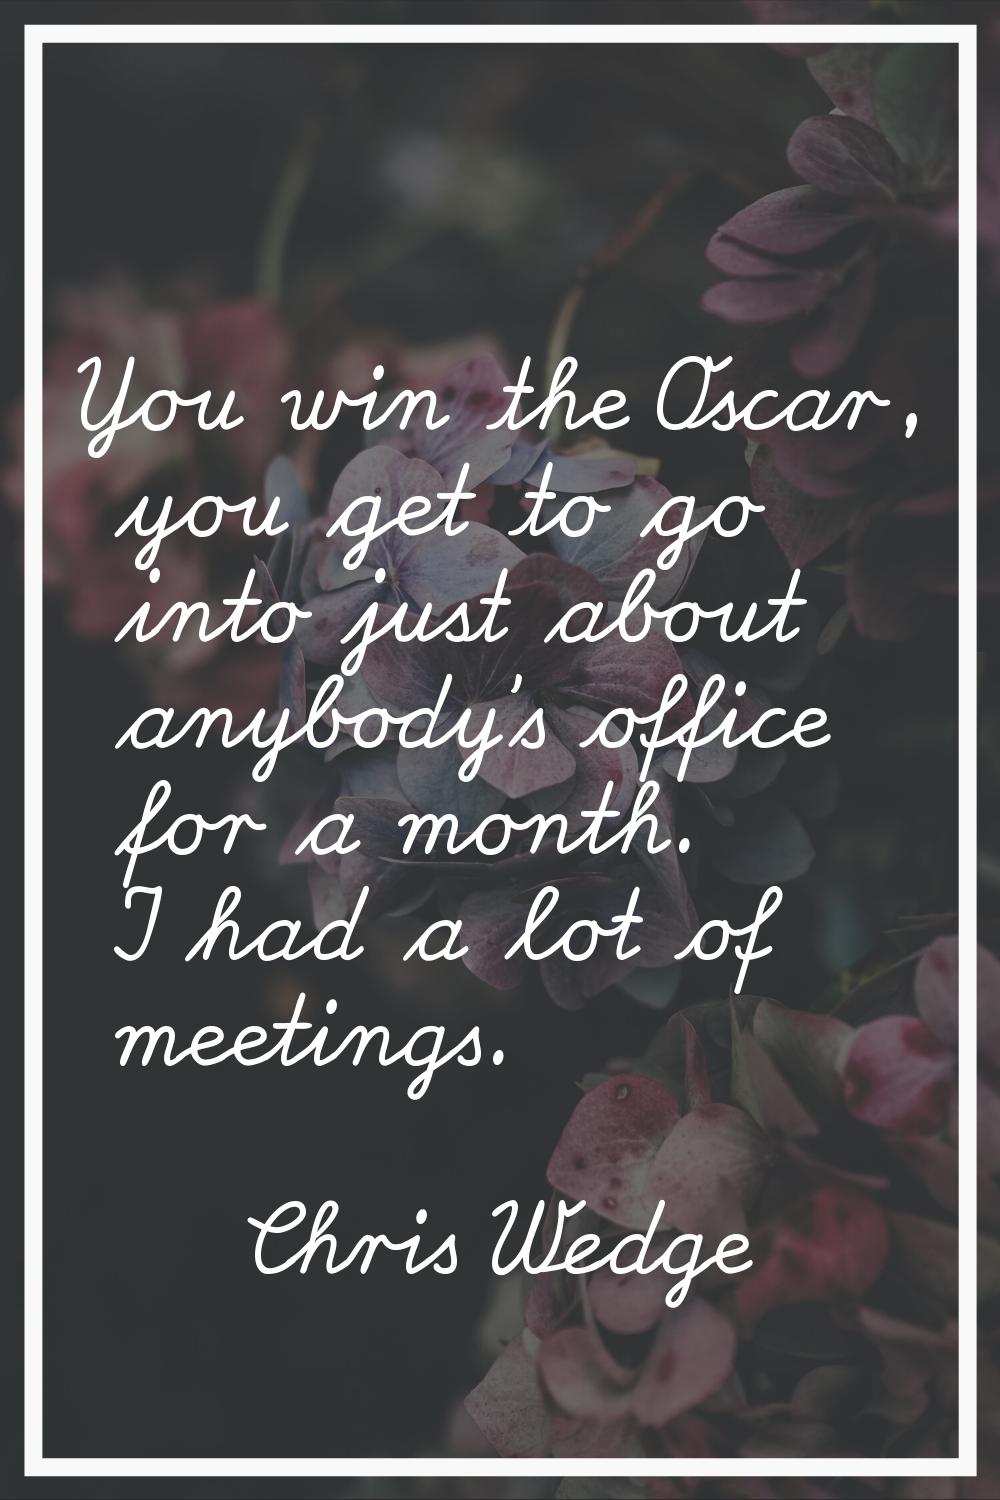 You win the Oscar, you get to go into just about anybody's office for a month. I had a lot of meeti